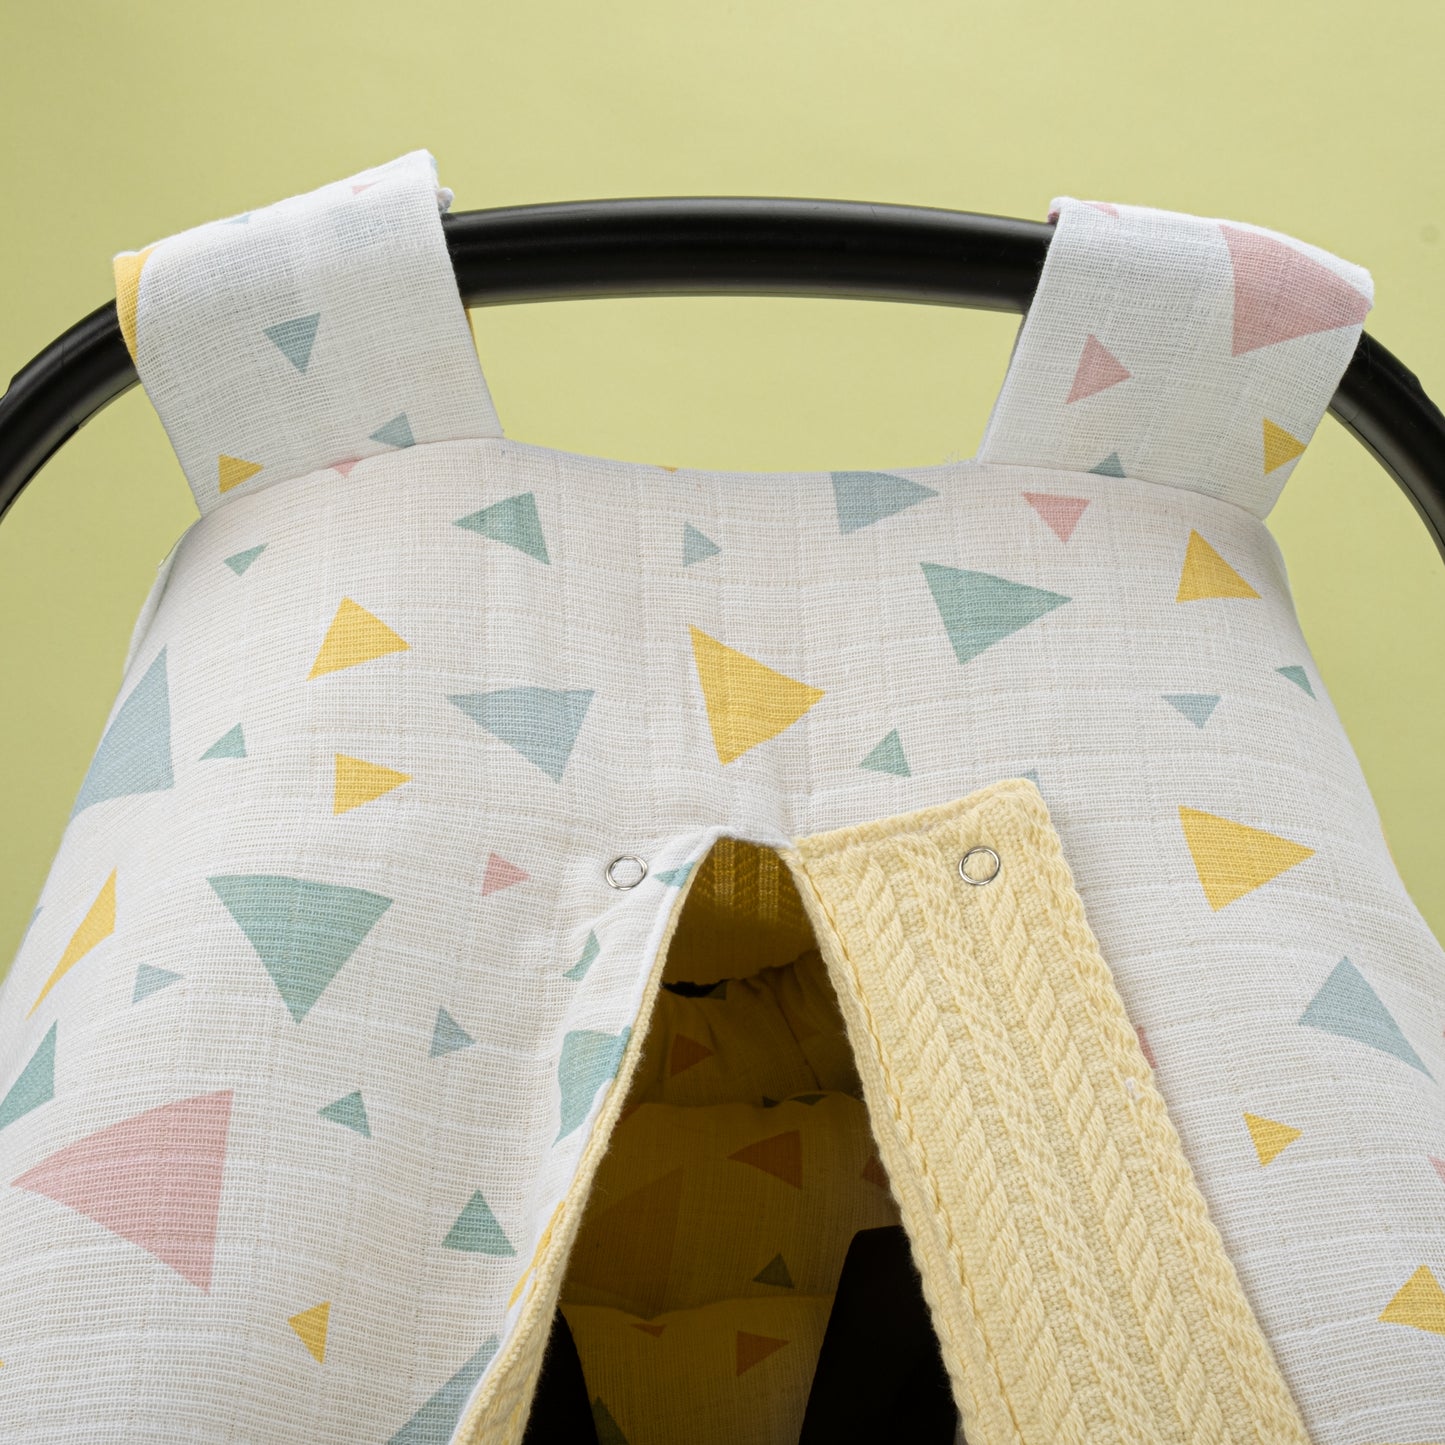 Stroller Cover Set - Double Side - Yellow Braid - Colored Triangles